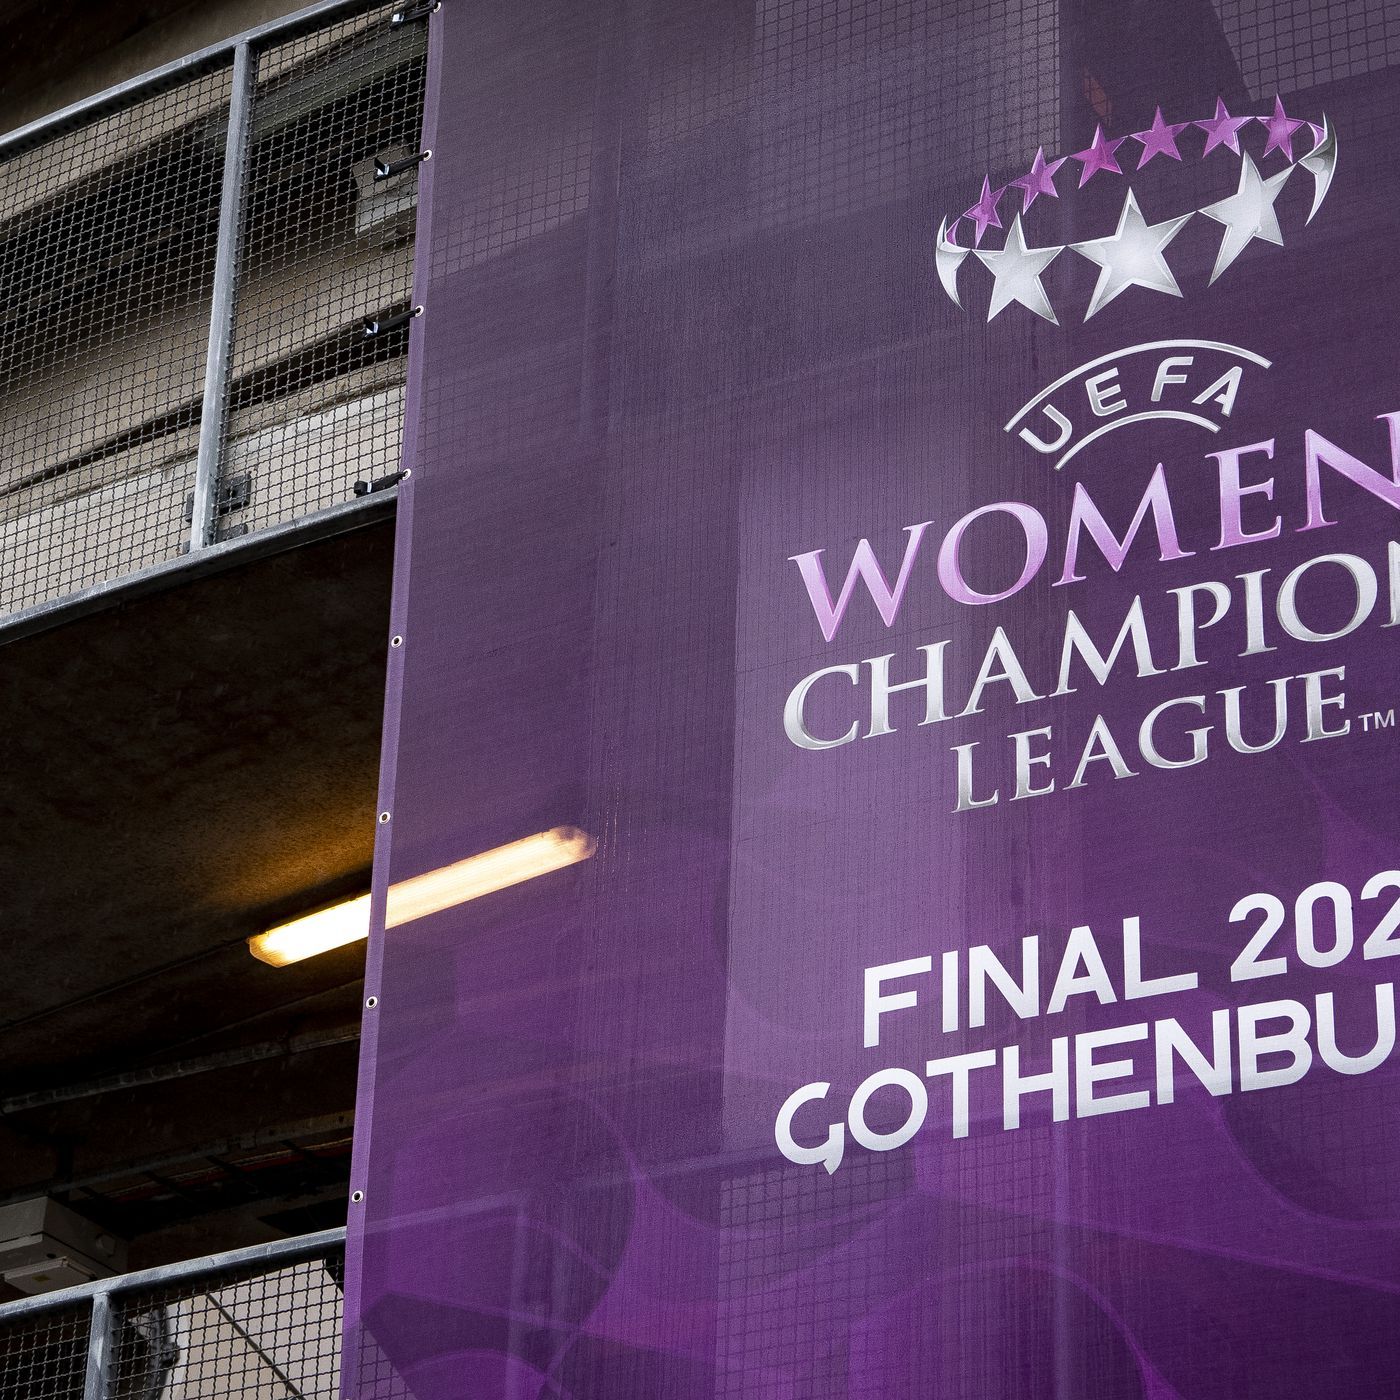 Chelsea vs. Barcelona, Women's Champions League Final: Preview, team news, how to watch Ain't Got No History